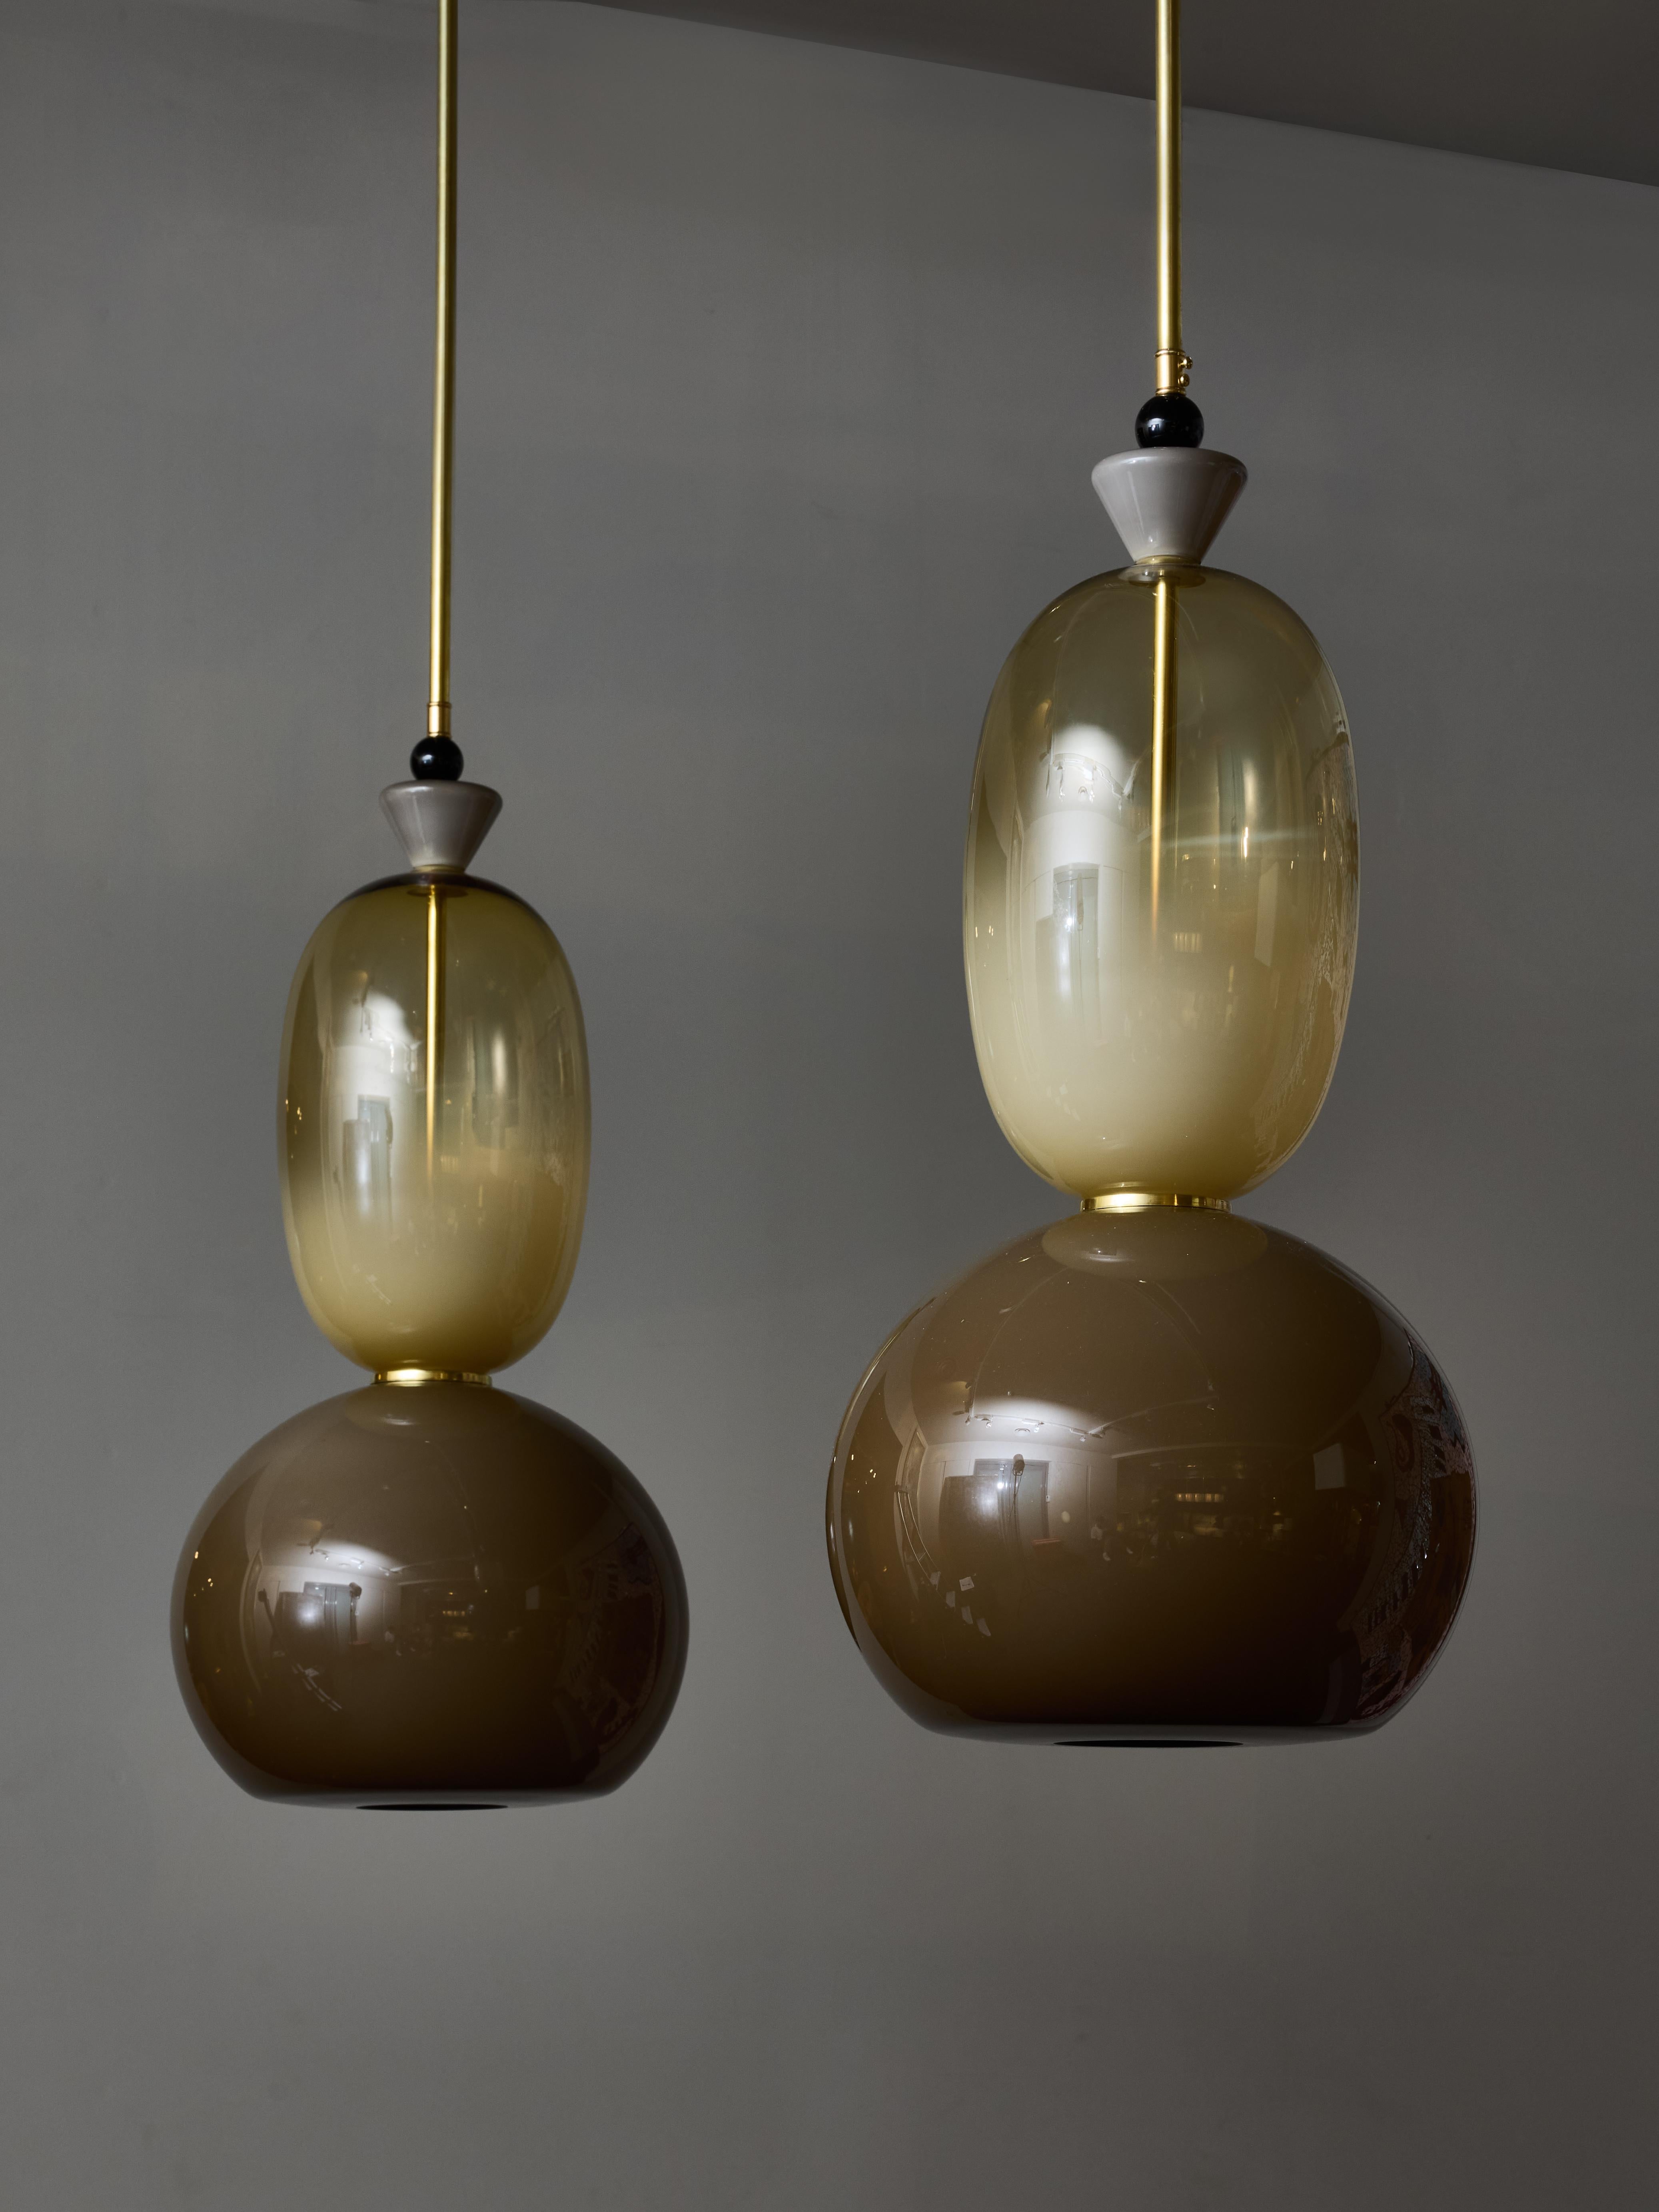 Pair of decorative suspensions made of a brass stem and a stack of different sized Murano glass globes and decors in various colours.

